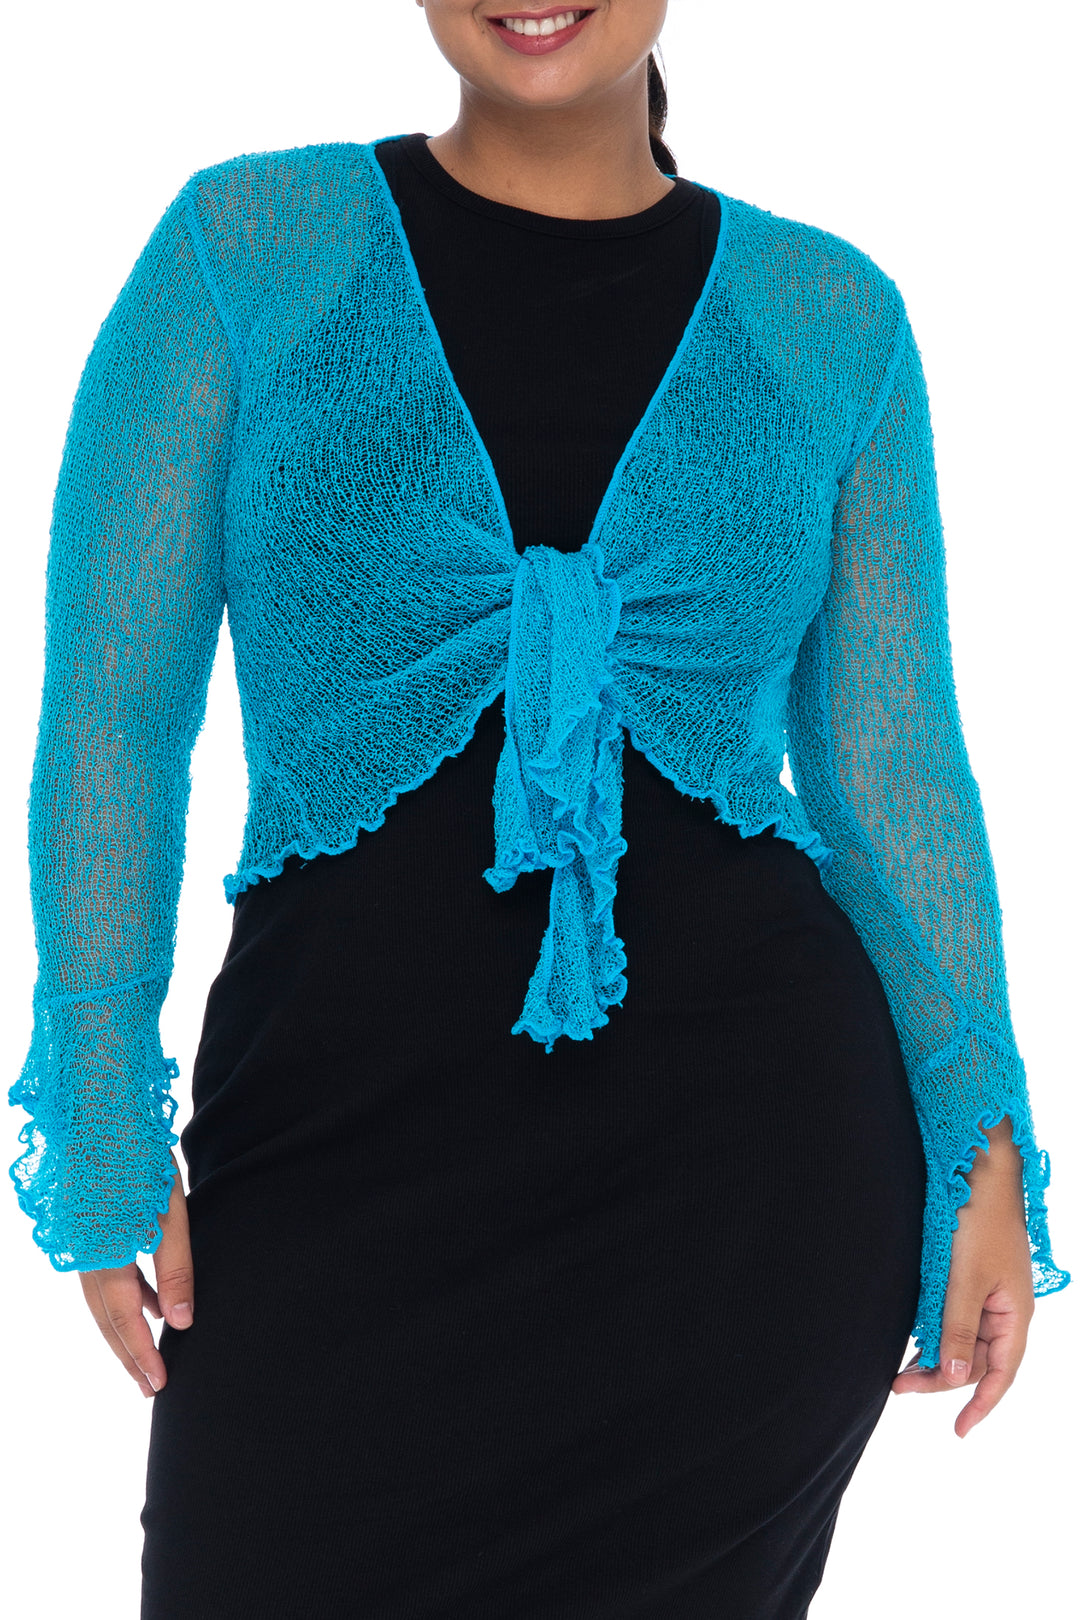 Plus Size Long Bell Sleeved Cropped Cardigan Shrug